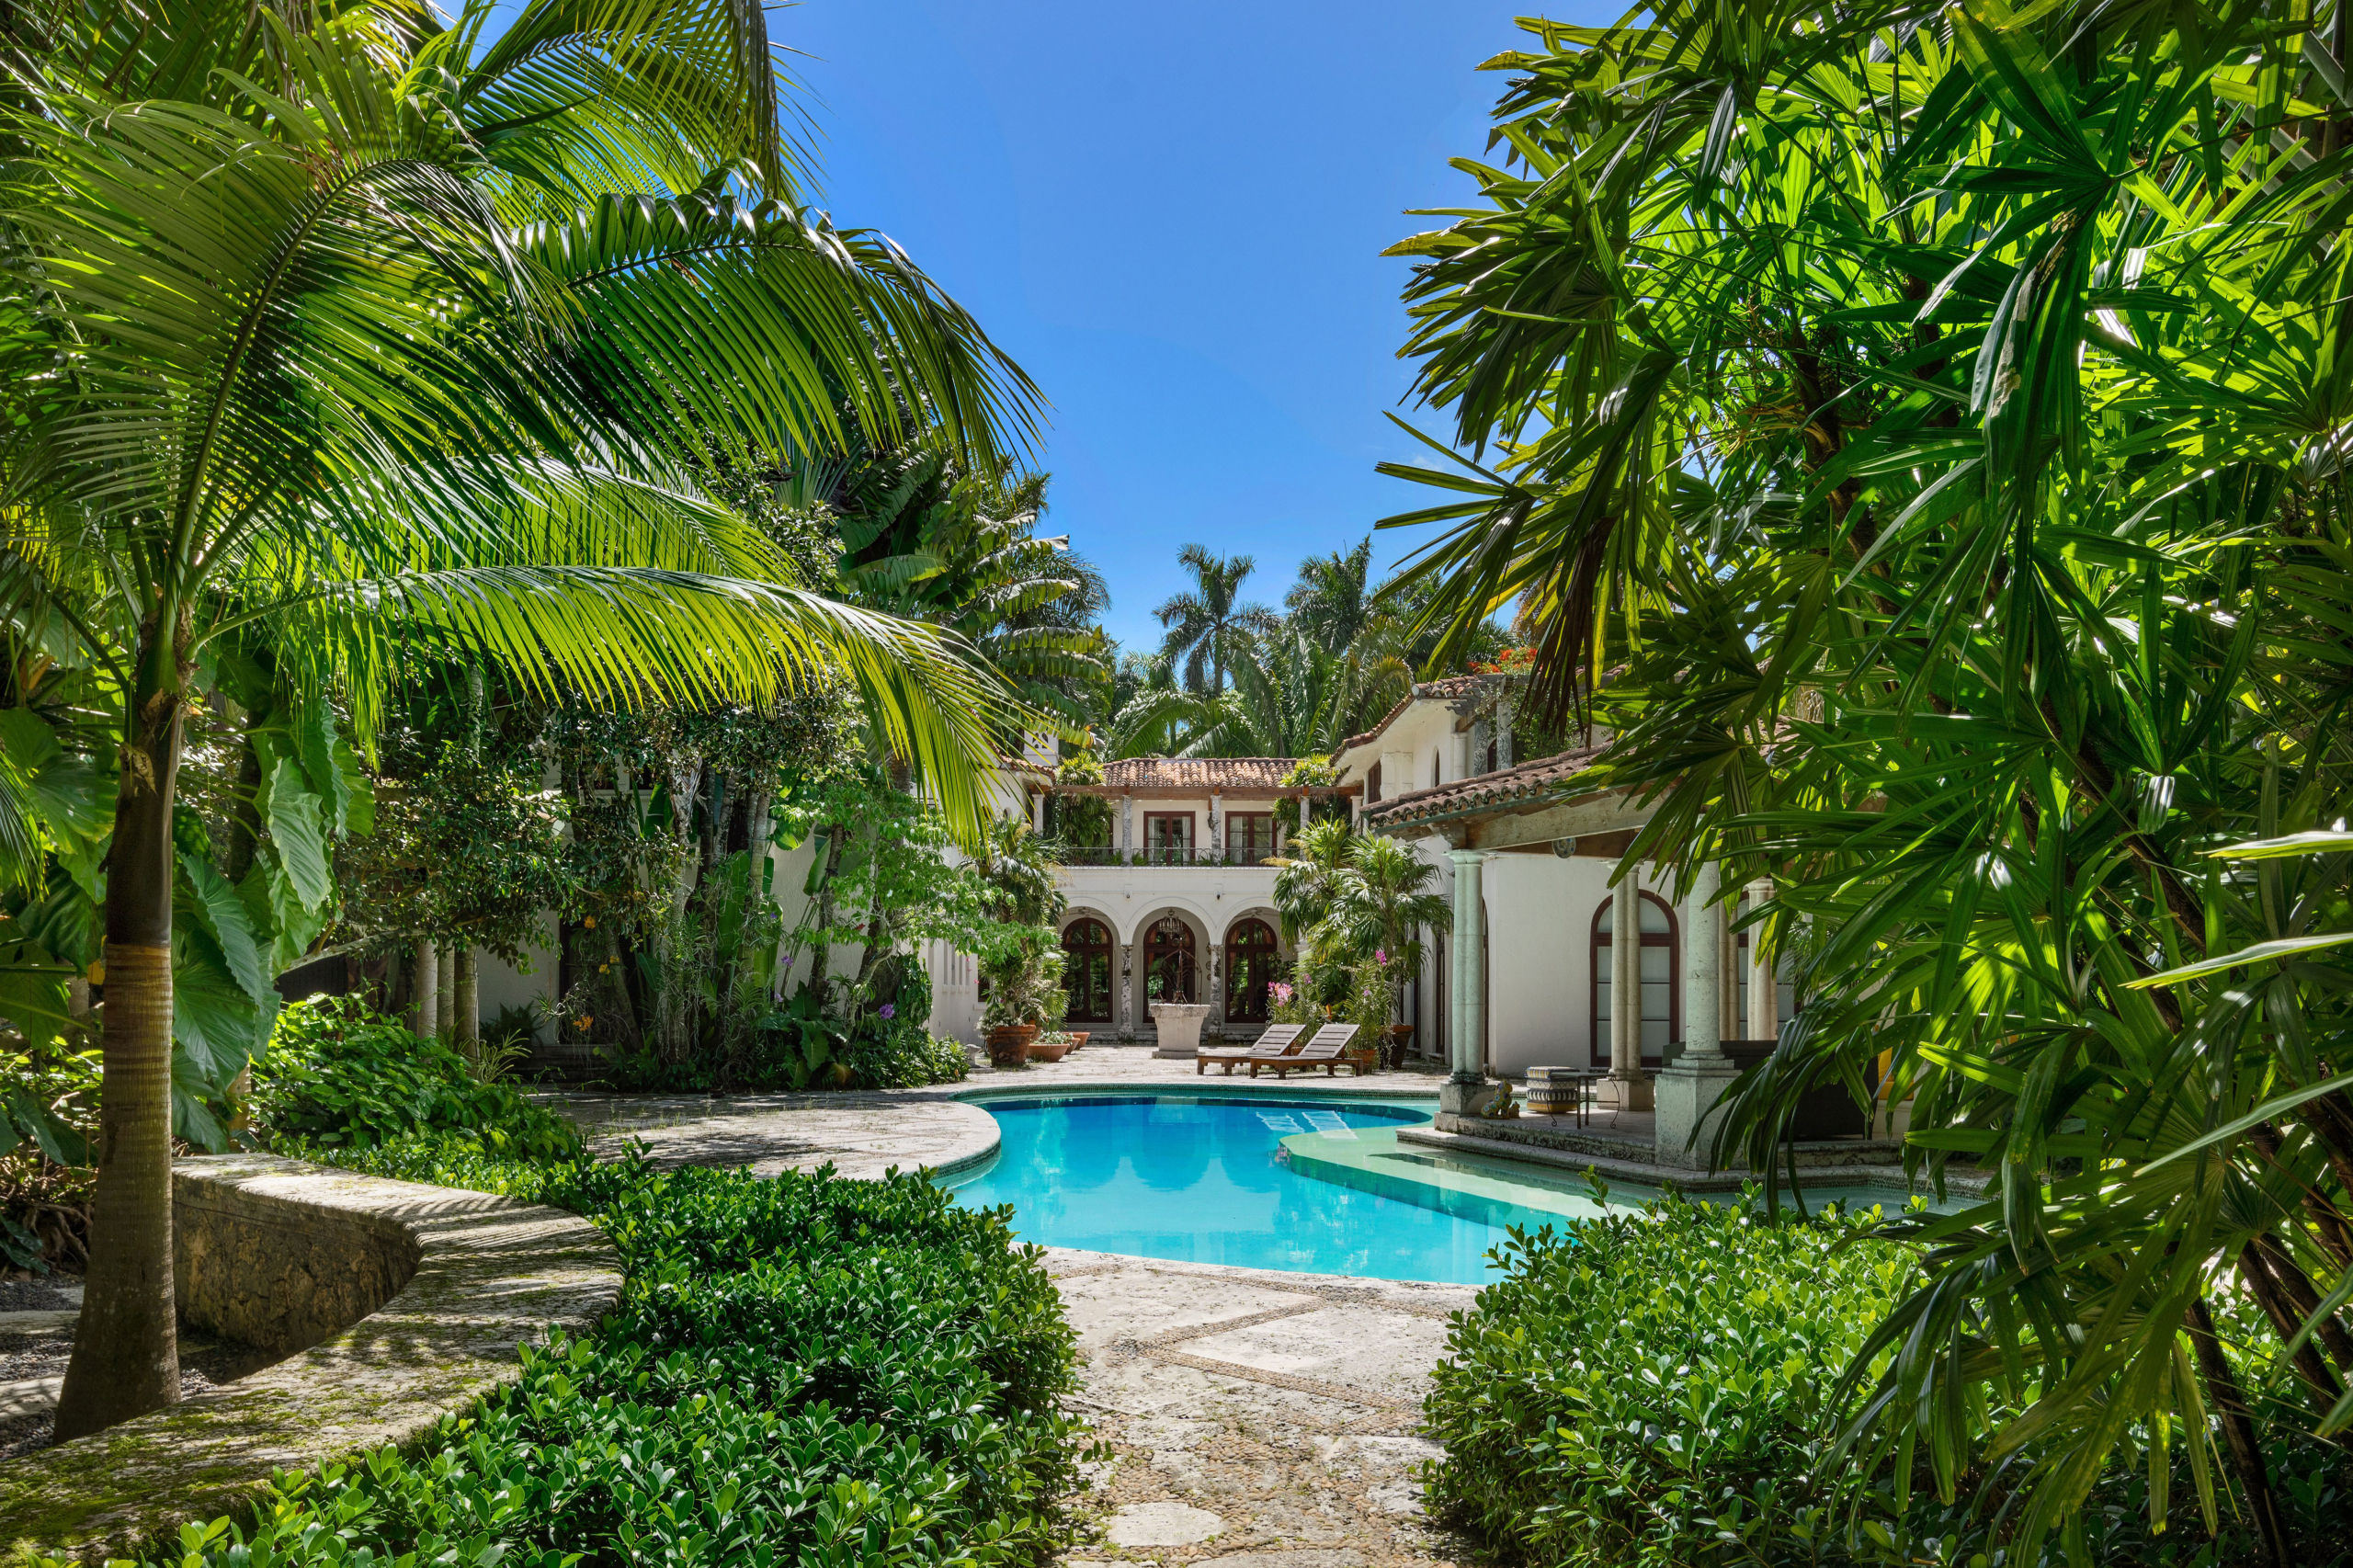 3725 Leafy Way, Coconut Grove, Miami, Florida, USA | The Property in the Gardens | Listed by Dennis Carvajal, Real Estate Agent, ONE Sotheby's International Realty | Finest Residences